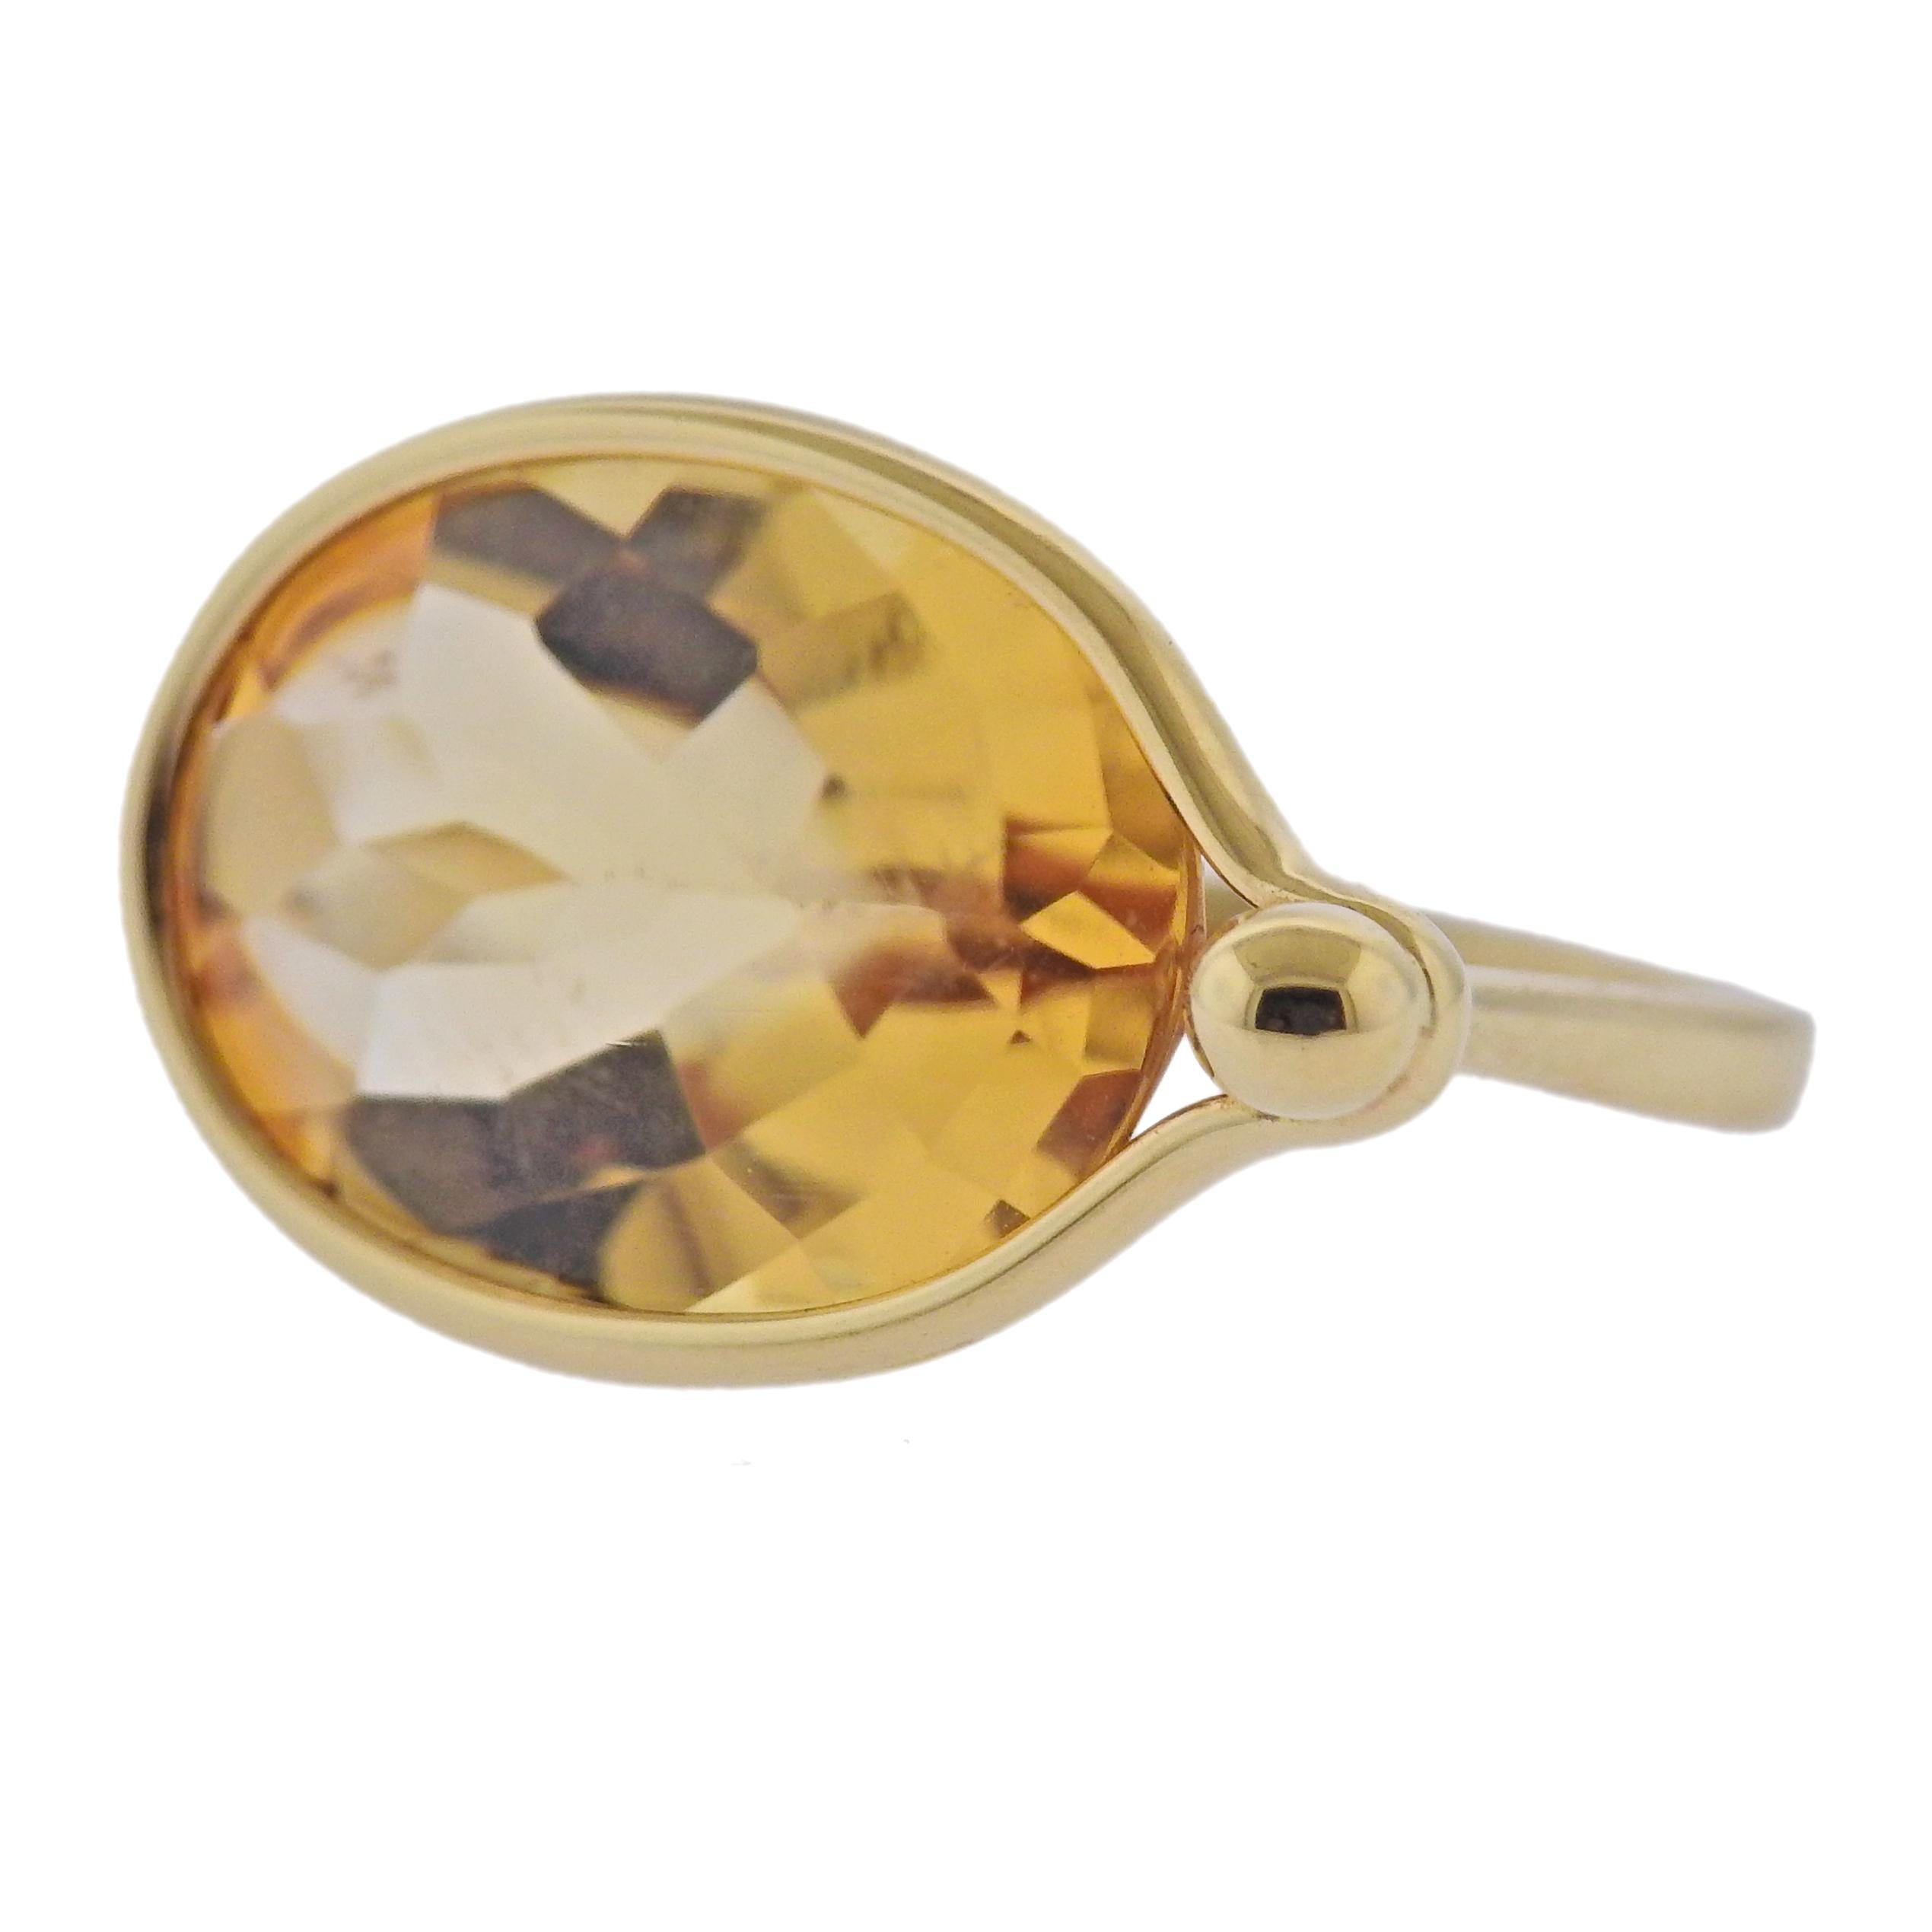 Brand new Georg Jensen 18k gold ring from Savannah collection with citrine. Top of the ring - 15mm x 24mm. Available in size: 51. Marked: GJ mark, 750. Model # 10003214. Weight - 5.5 grams.